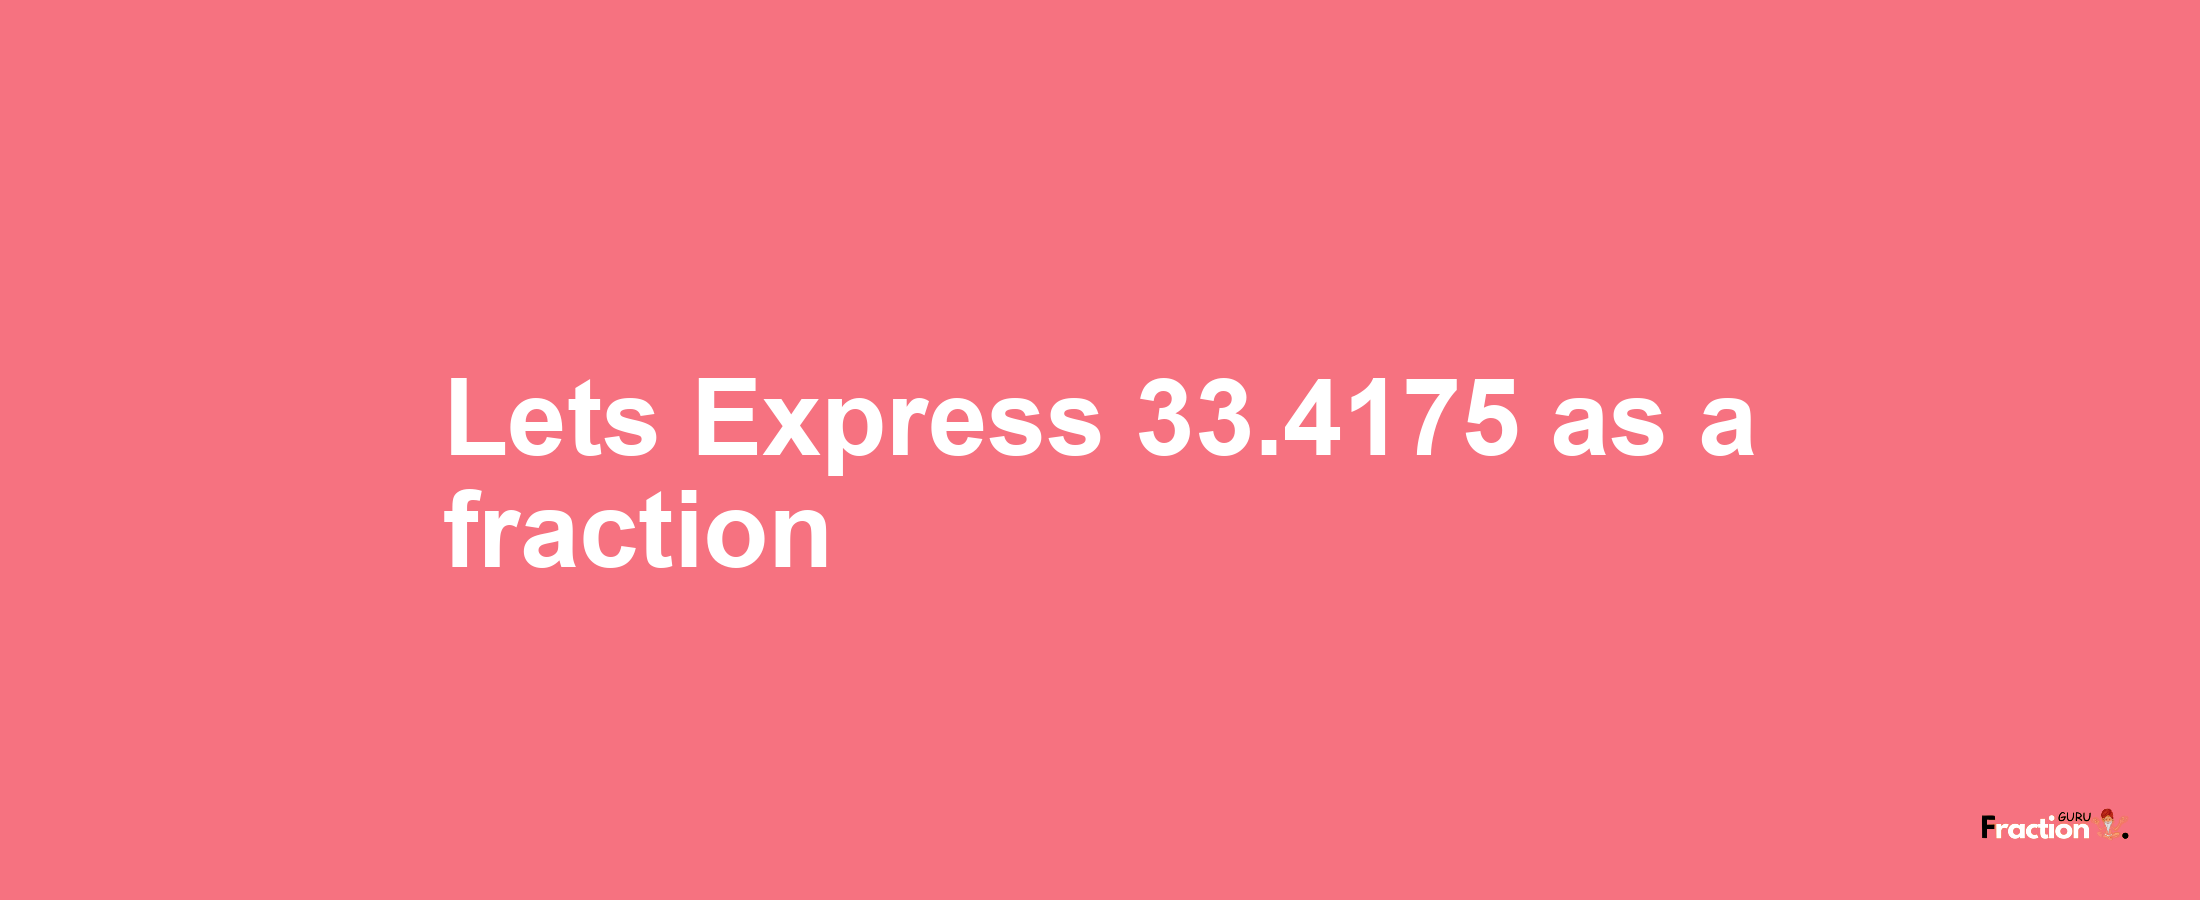 Lets Express 33.4175 as afraction